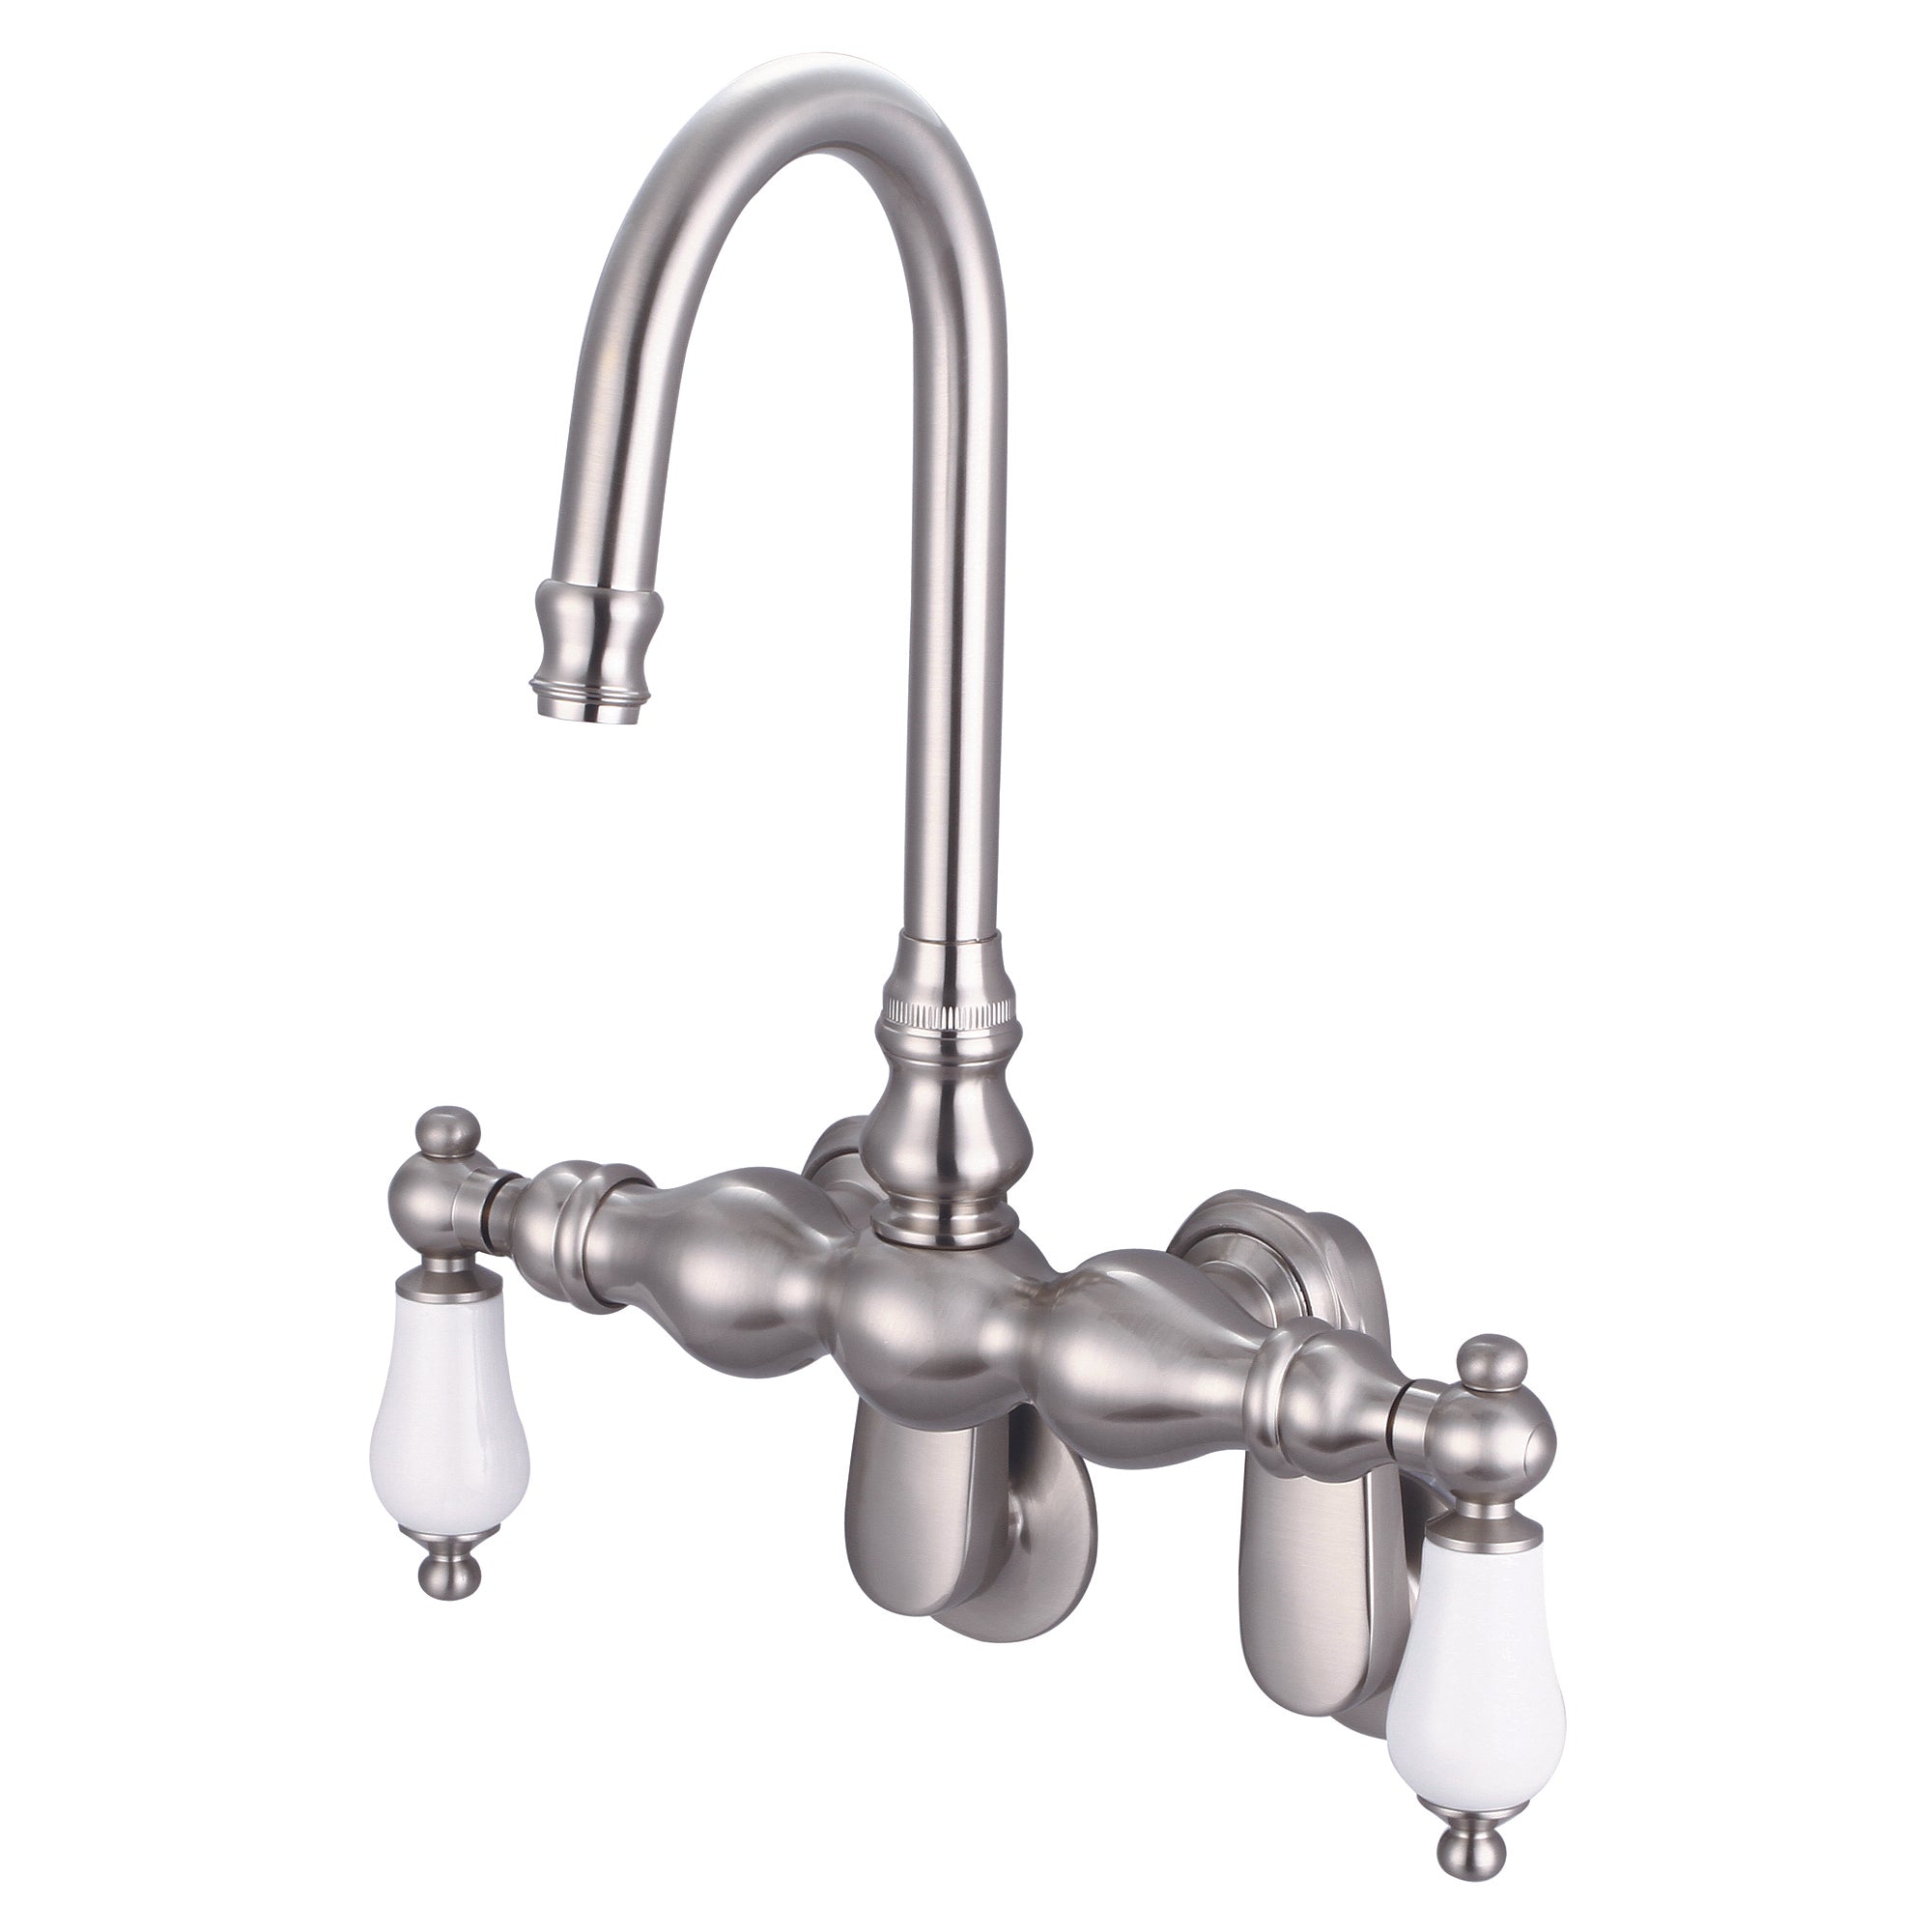 Water Creation | Vintage Classic Adjustable Spread Wall Mount Tub Faucet With Gooseneck Spout & Swivel Wall Connector in Brushed Nickel Finish With Porcelain Lever Handles Without labels | F6-0015-02-PL